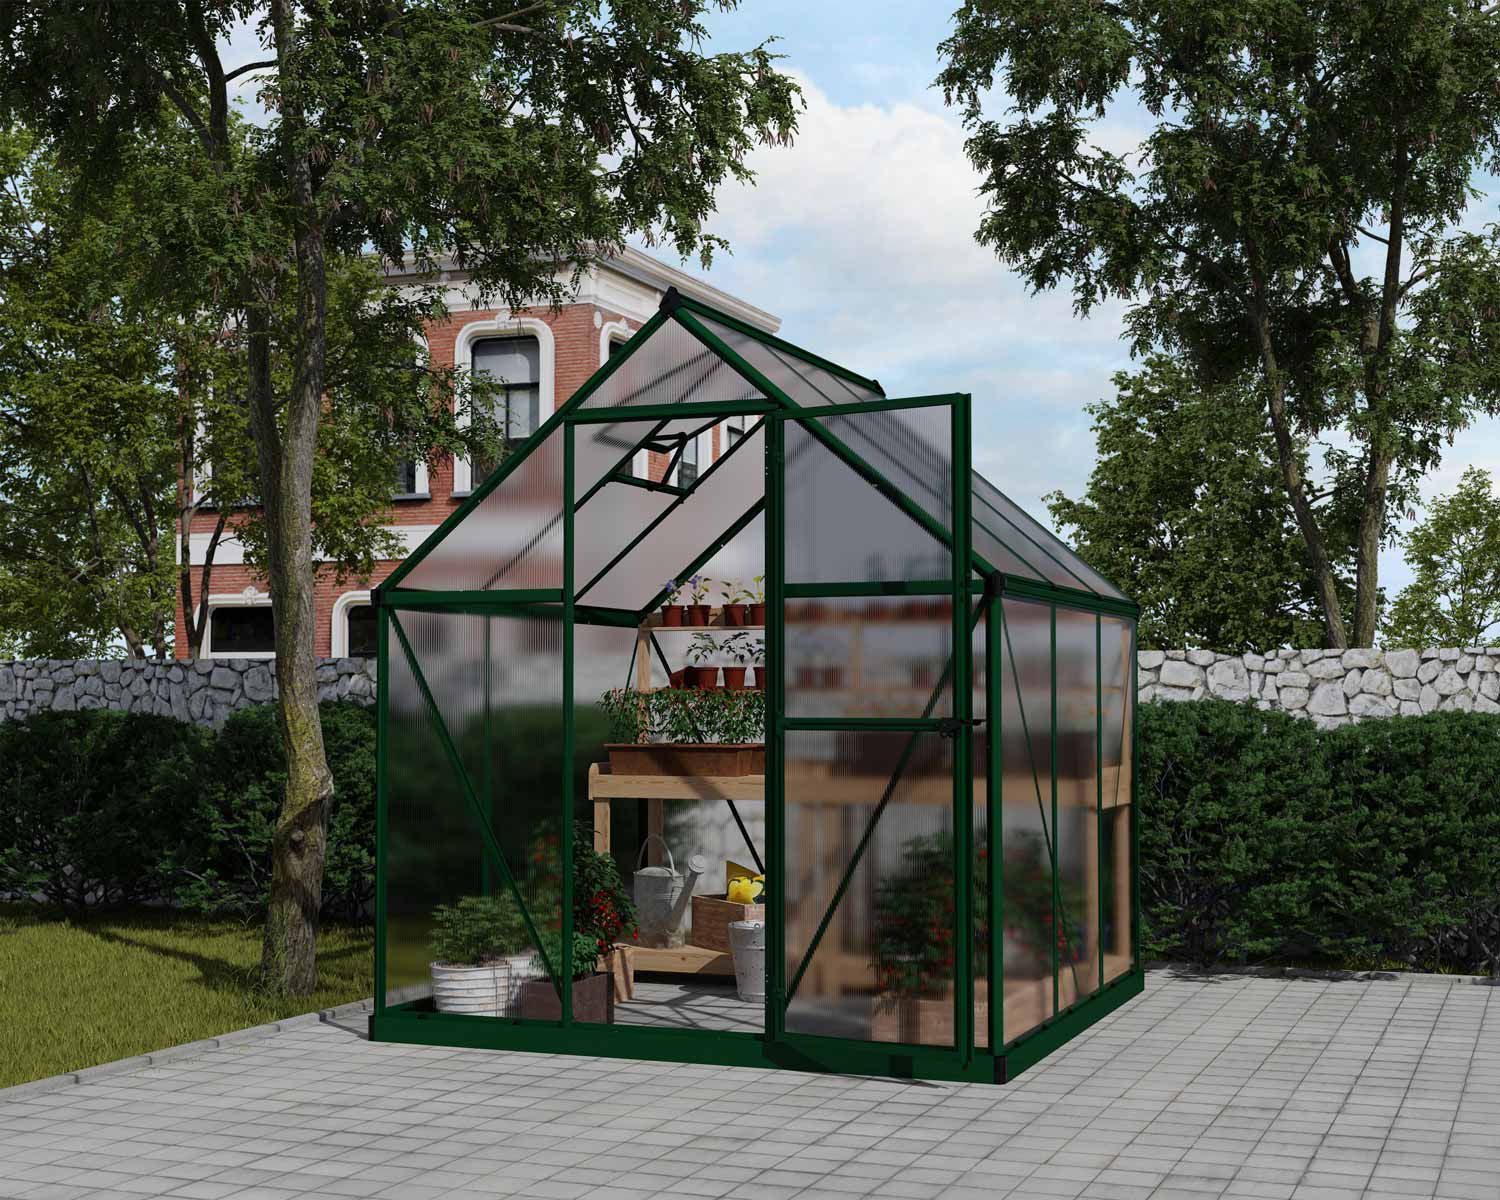 Greenhouse Mythos 6' x 6' Green Structure & Twinwall Panels outside on a lawn